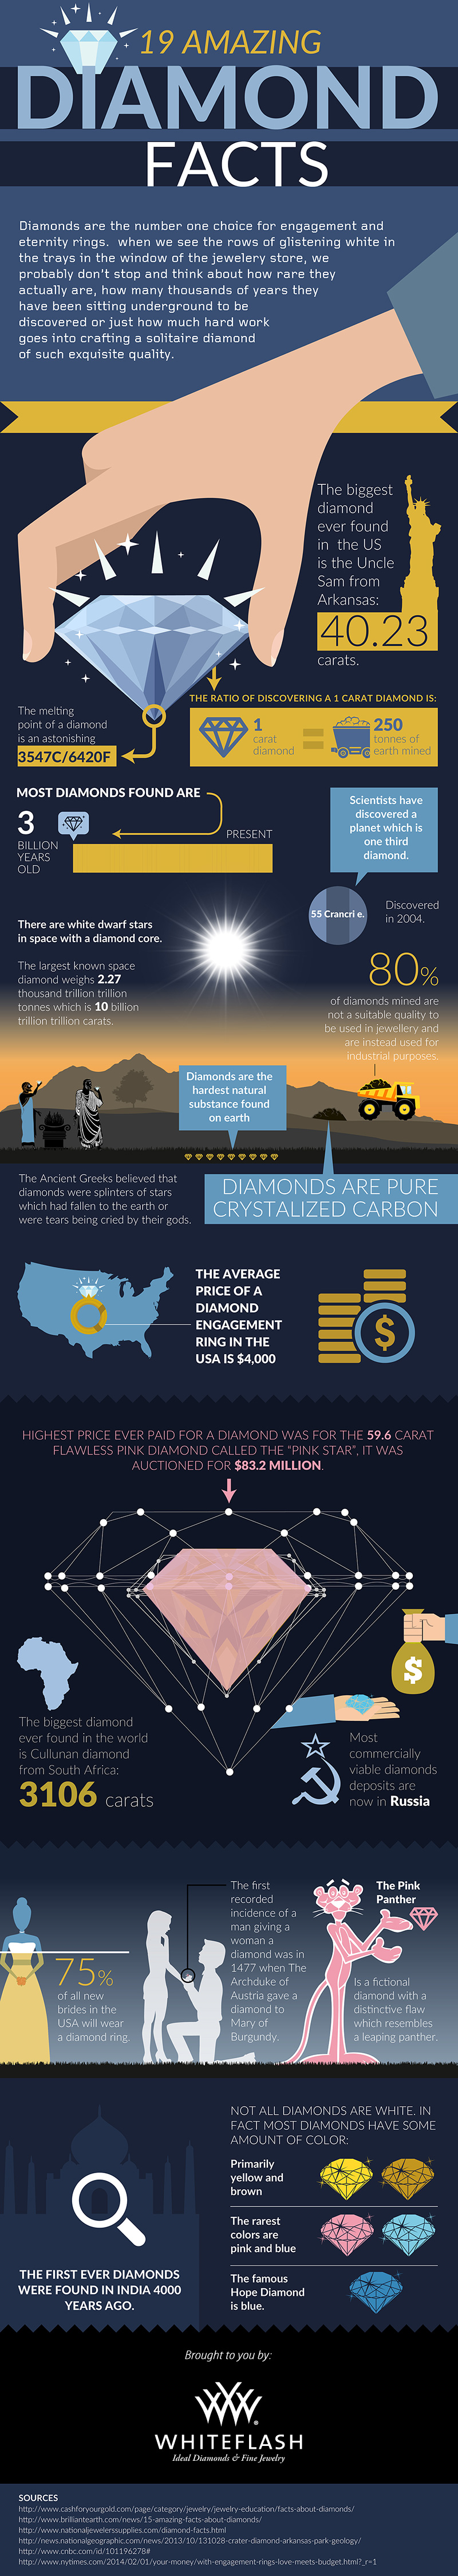 amazing-diamond-facts-infographic-by-whiteflash